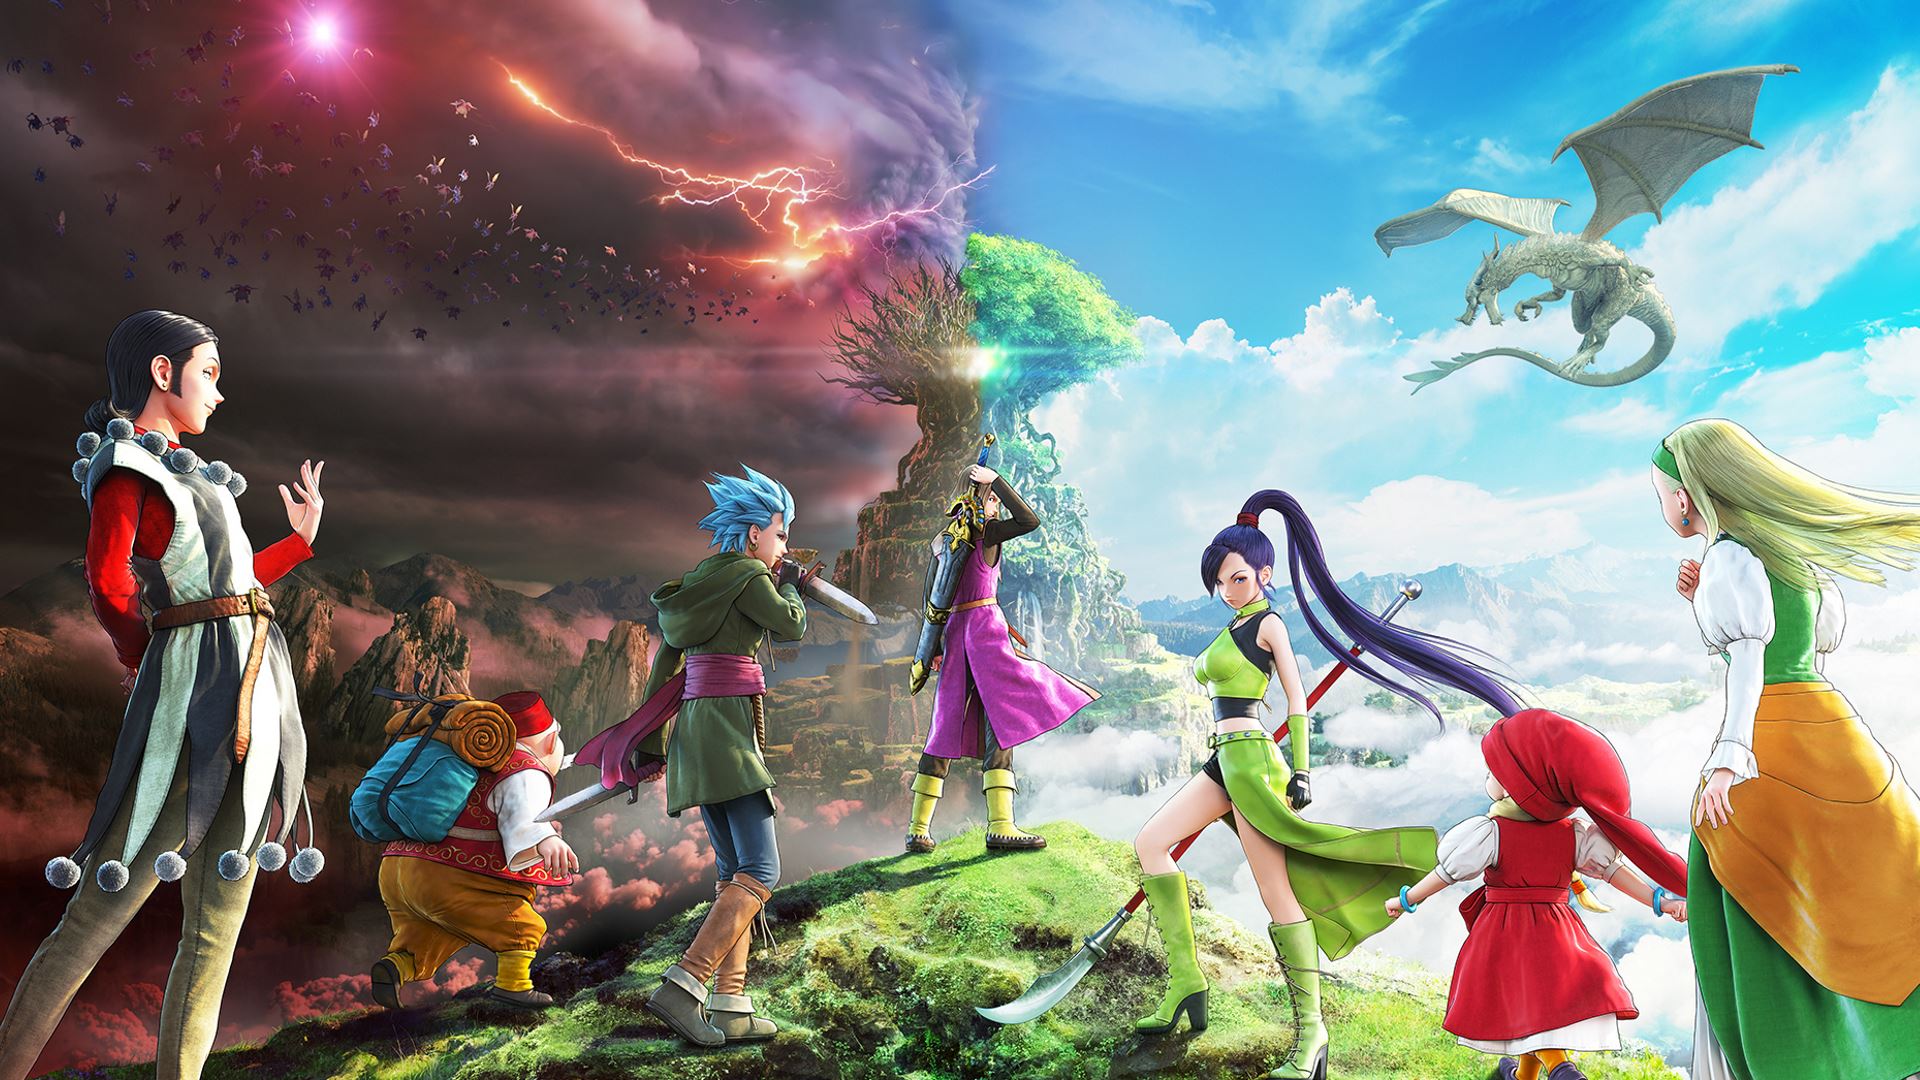  Dragon Quest XI S: Echoes of an Elusive Age - Definitive  Edition - Nintendo Switch : Nintendo of America: Everything Else